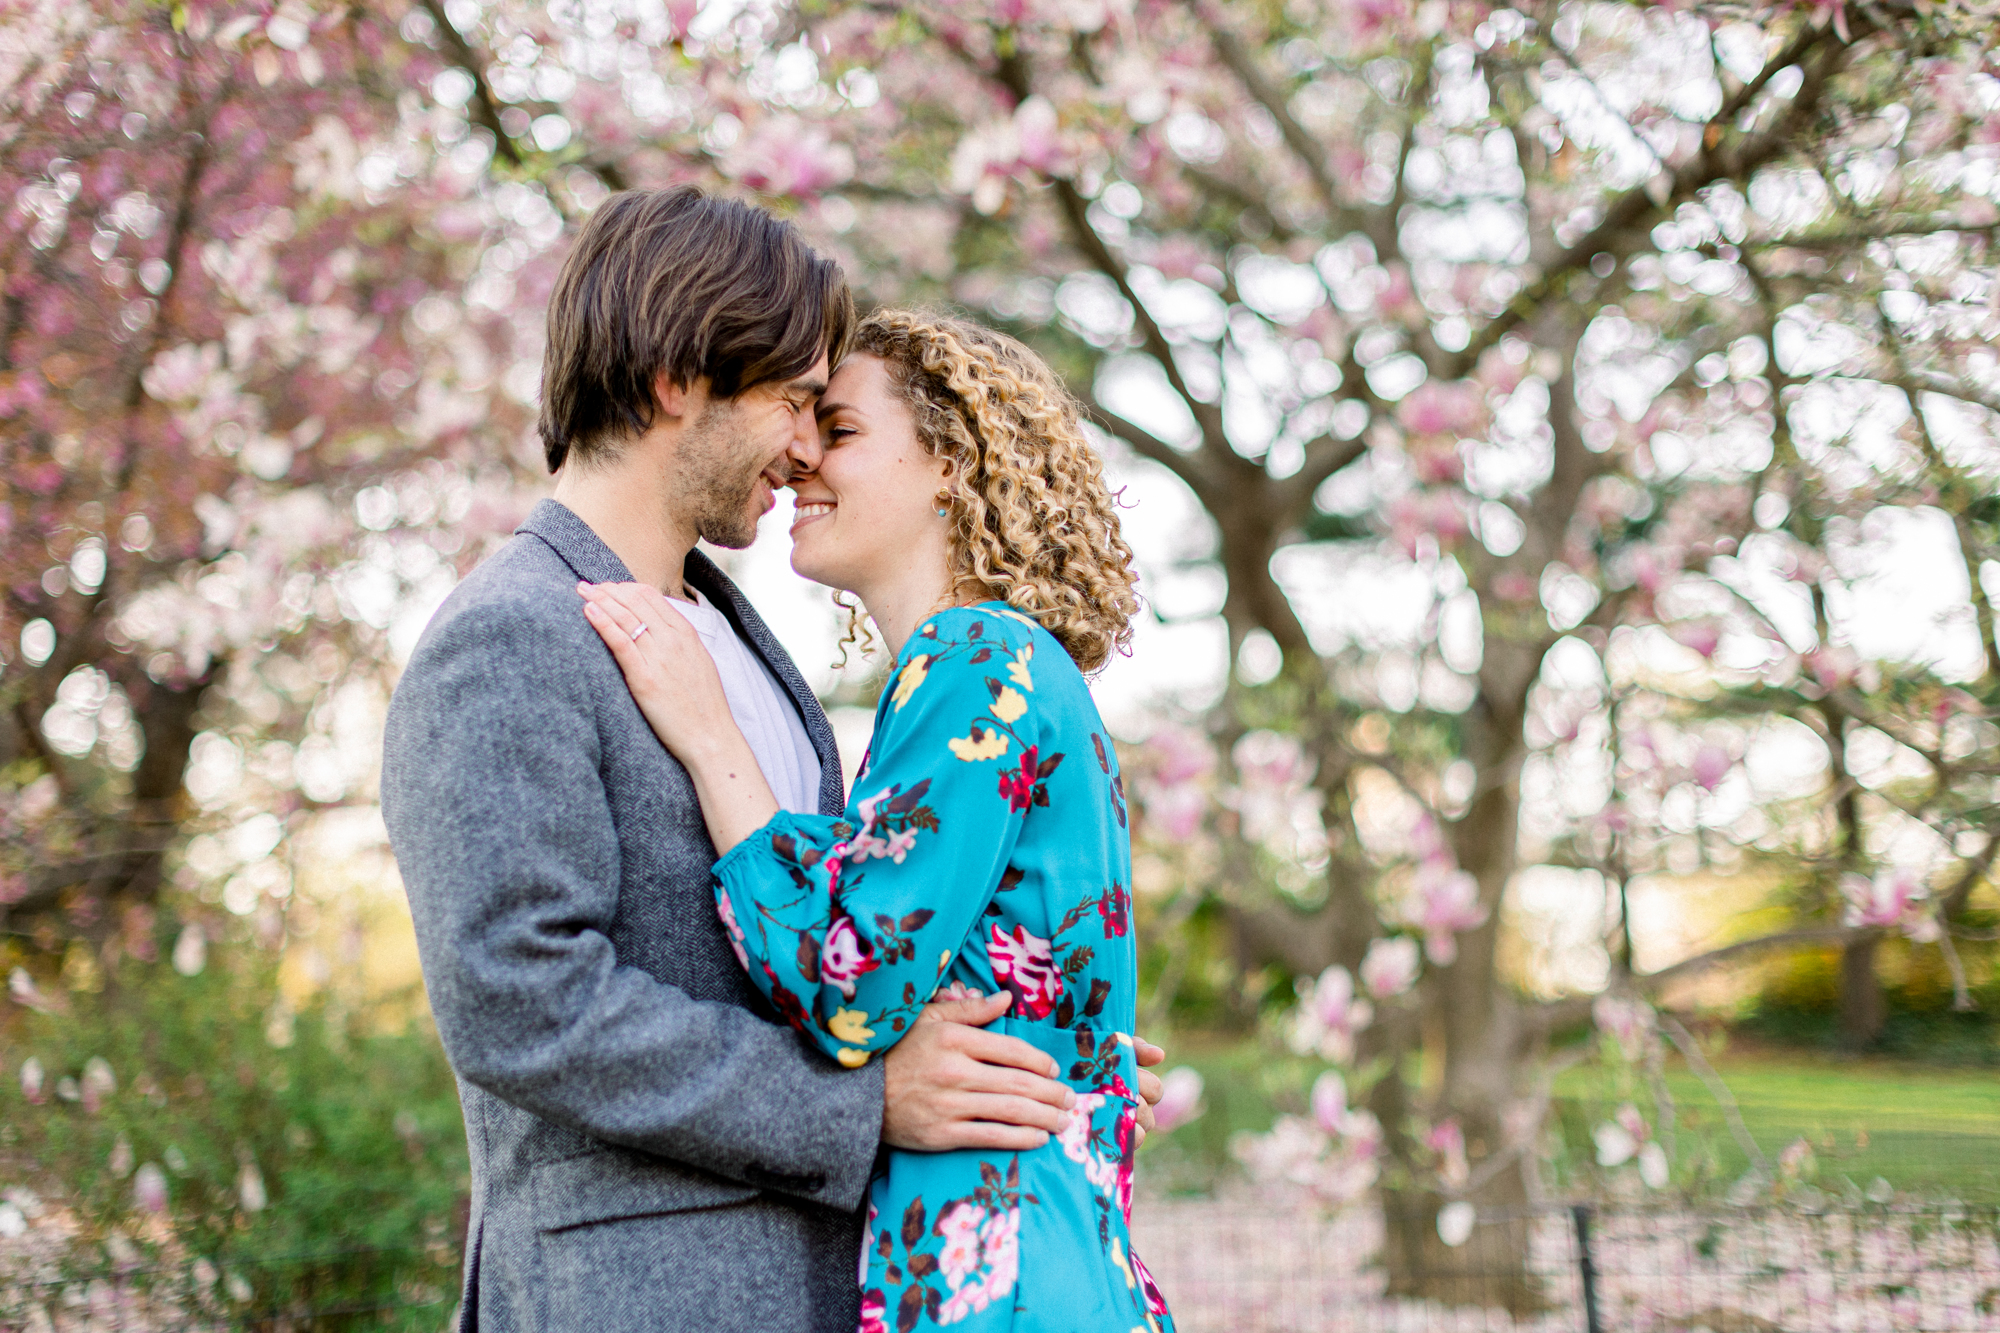 Beautiful Pose Ideas for your Engagement Session